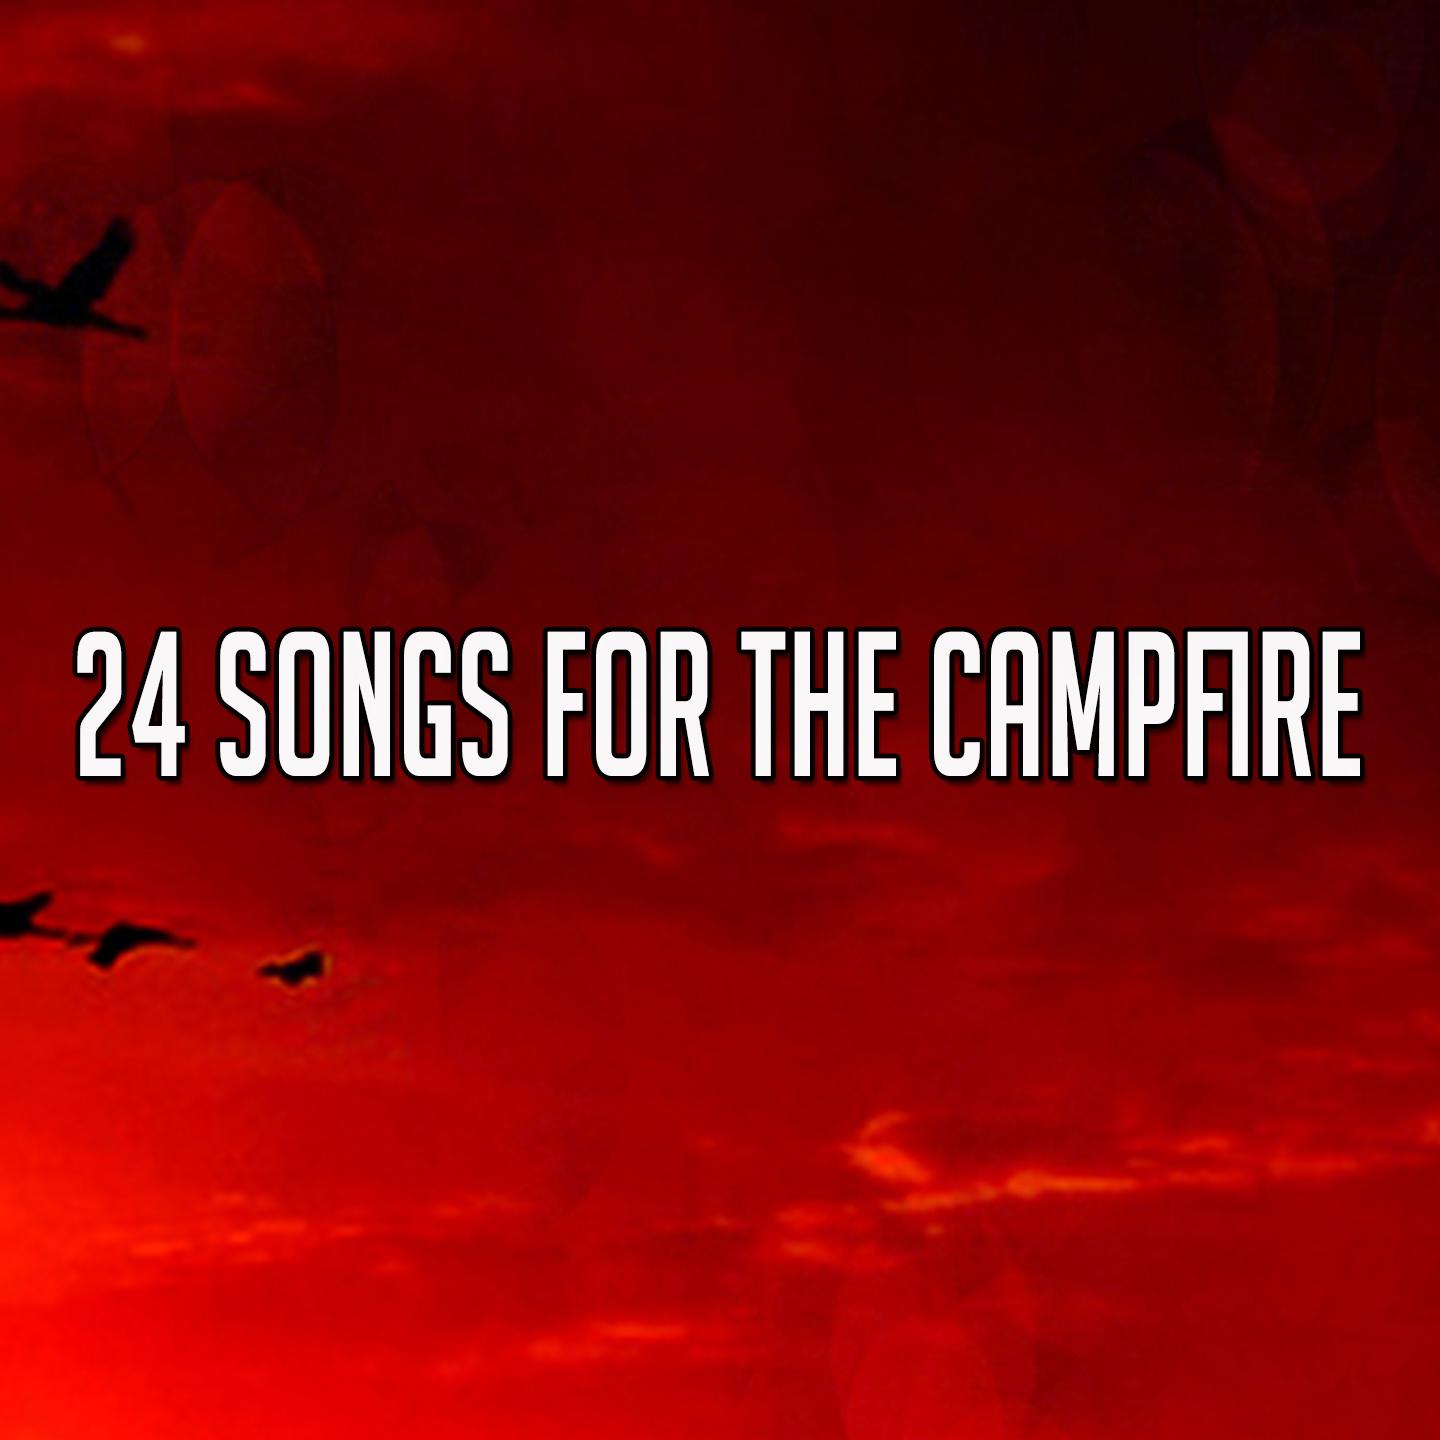 24 Songs for the Campfire